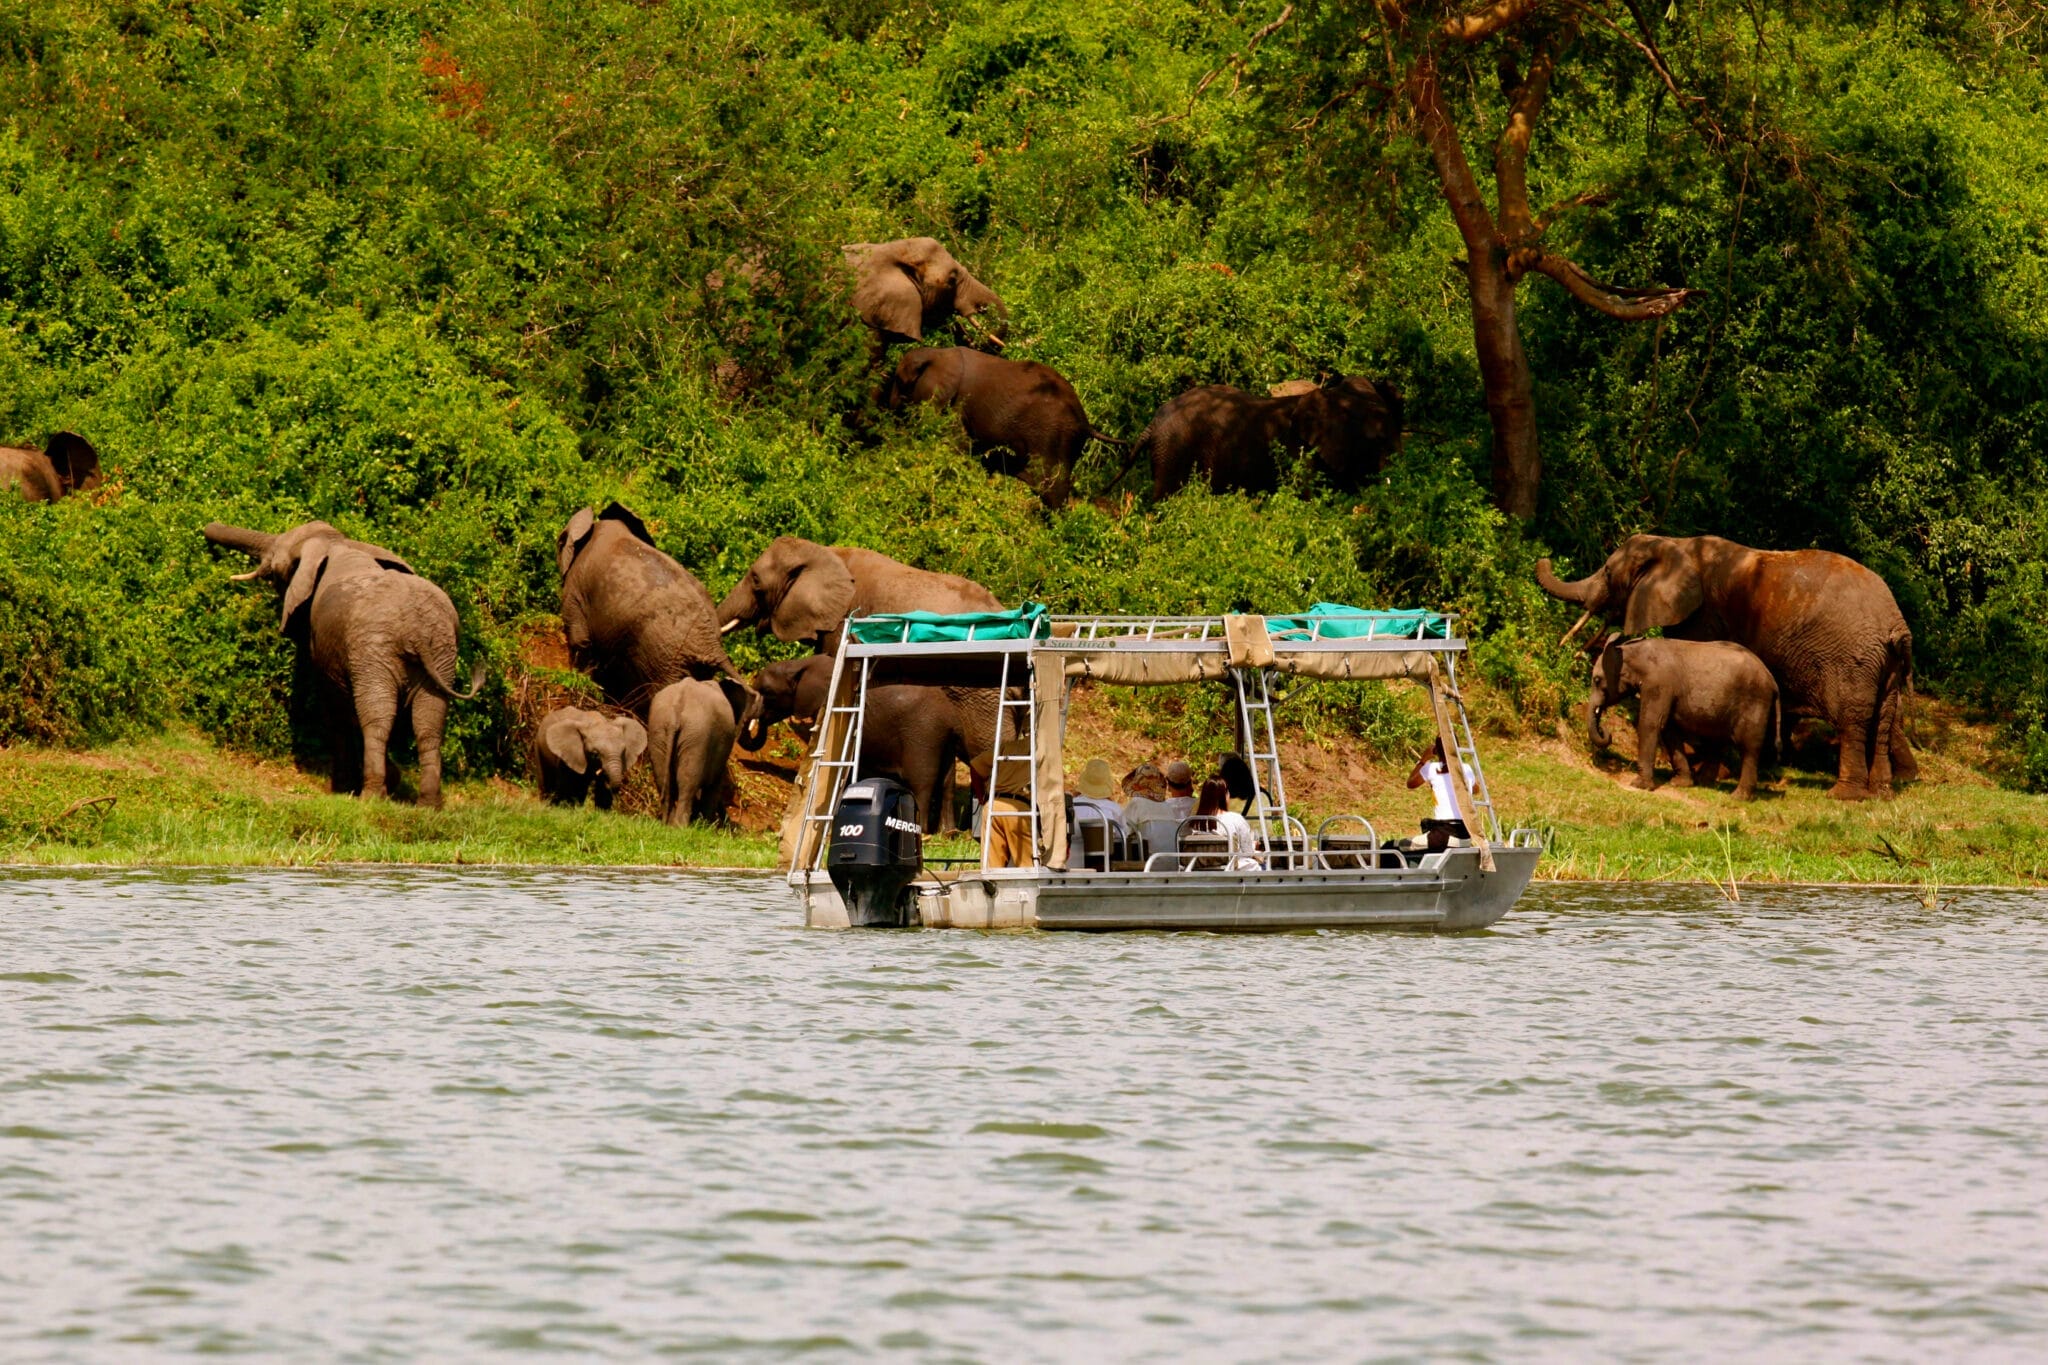 10 Reasons Why Uganda Should be Your Next Travel Destination